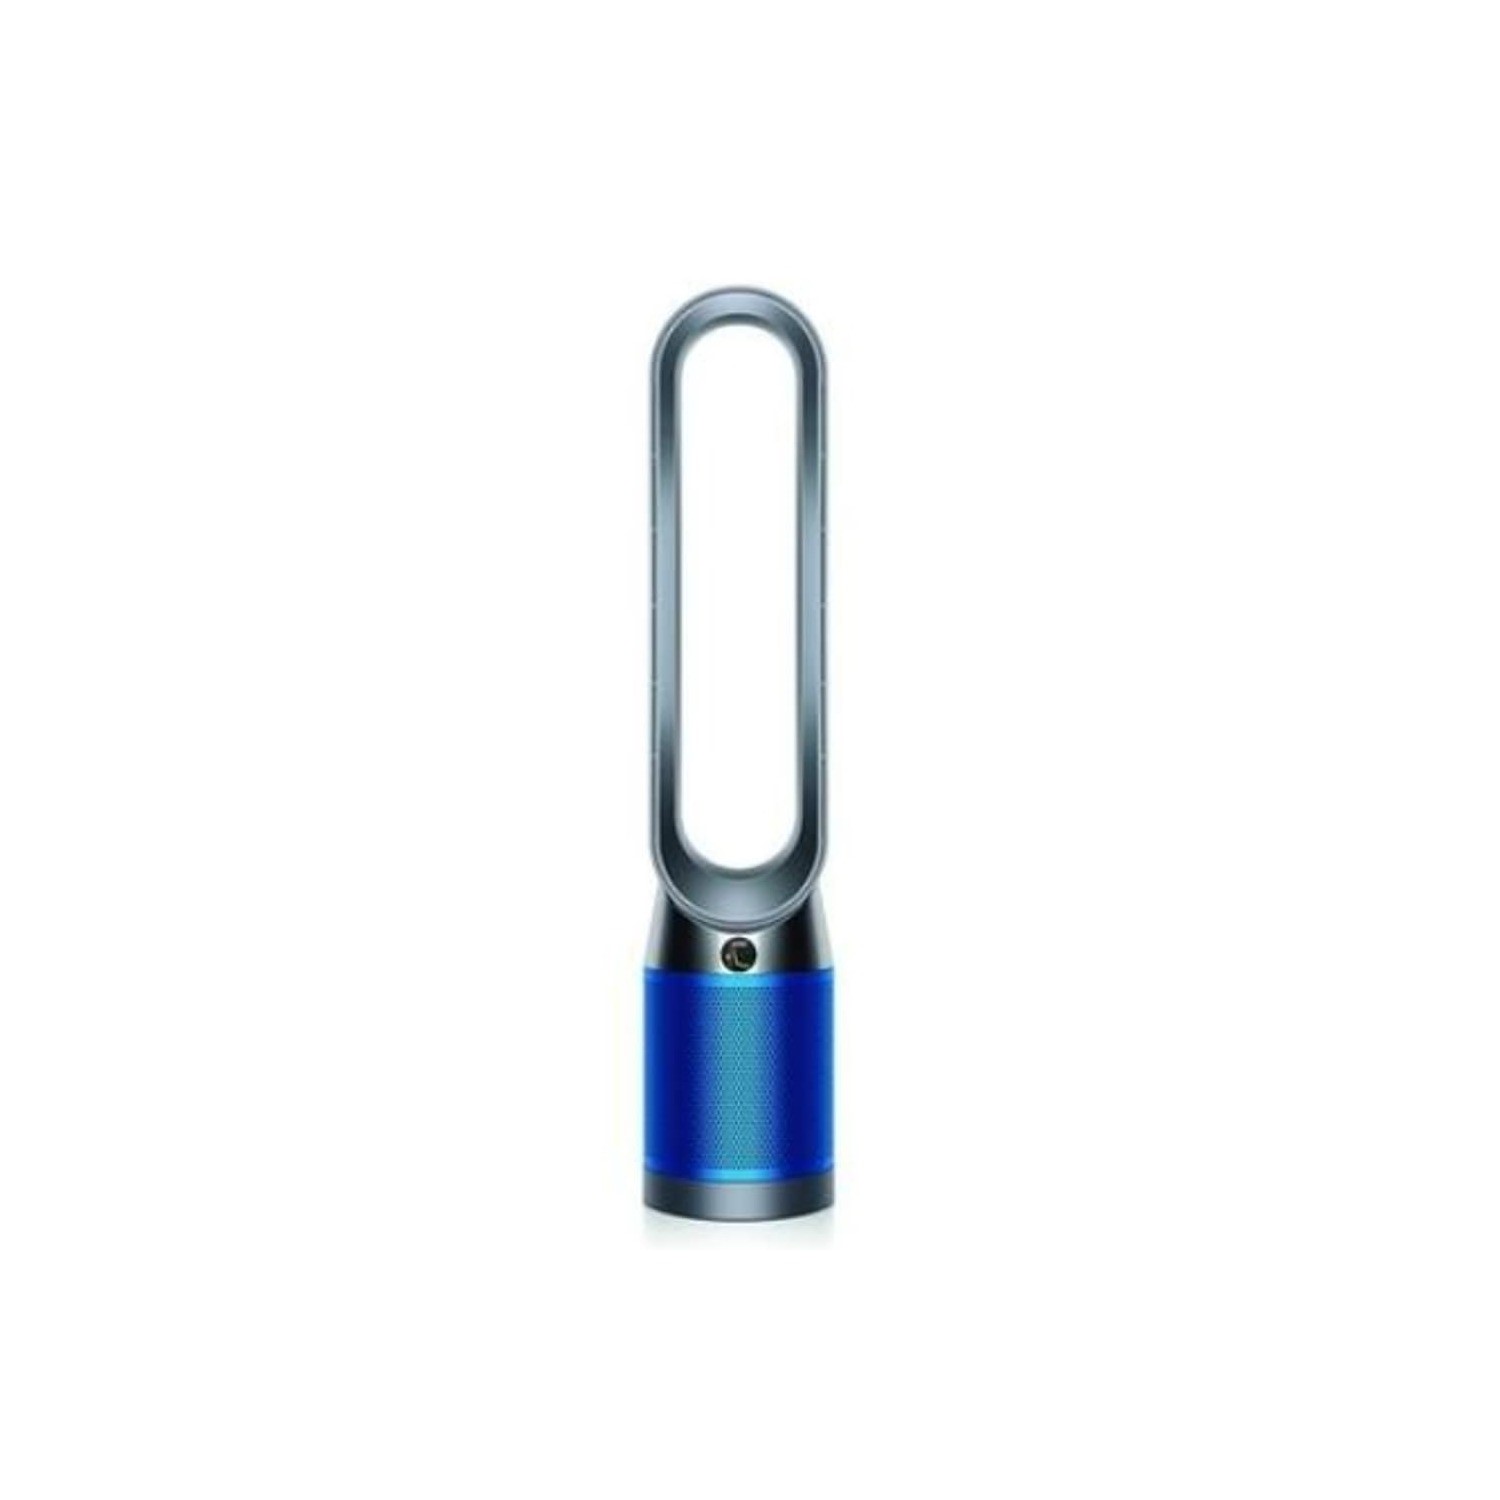 Dyson Pure Cool Tower Smart Air Purifier